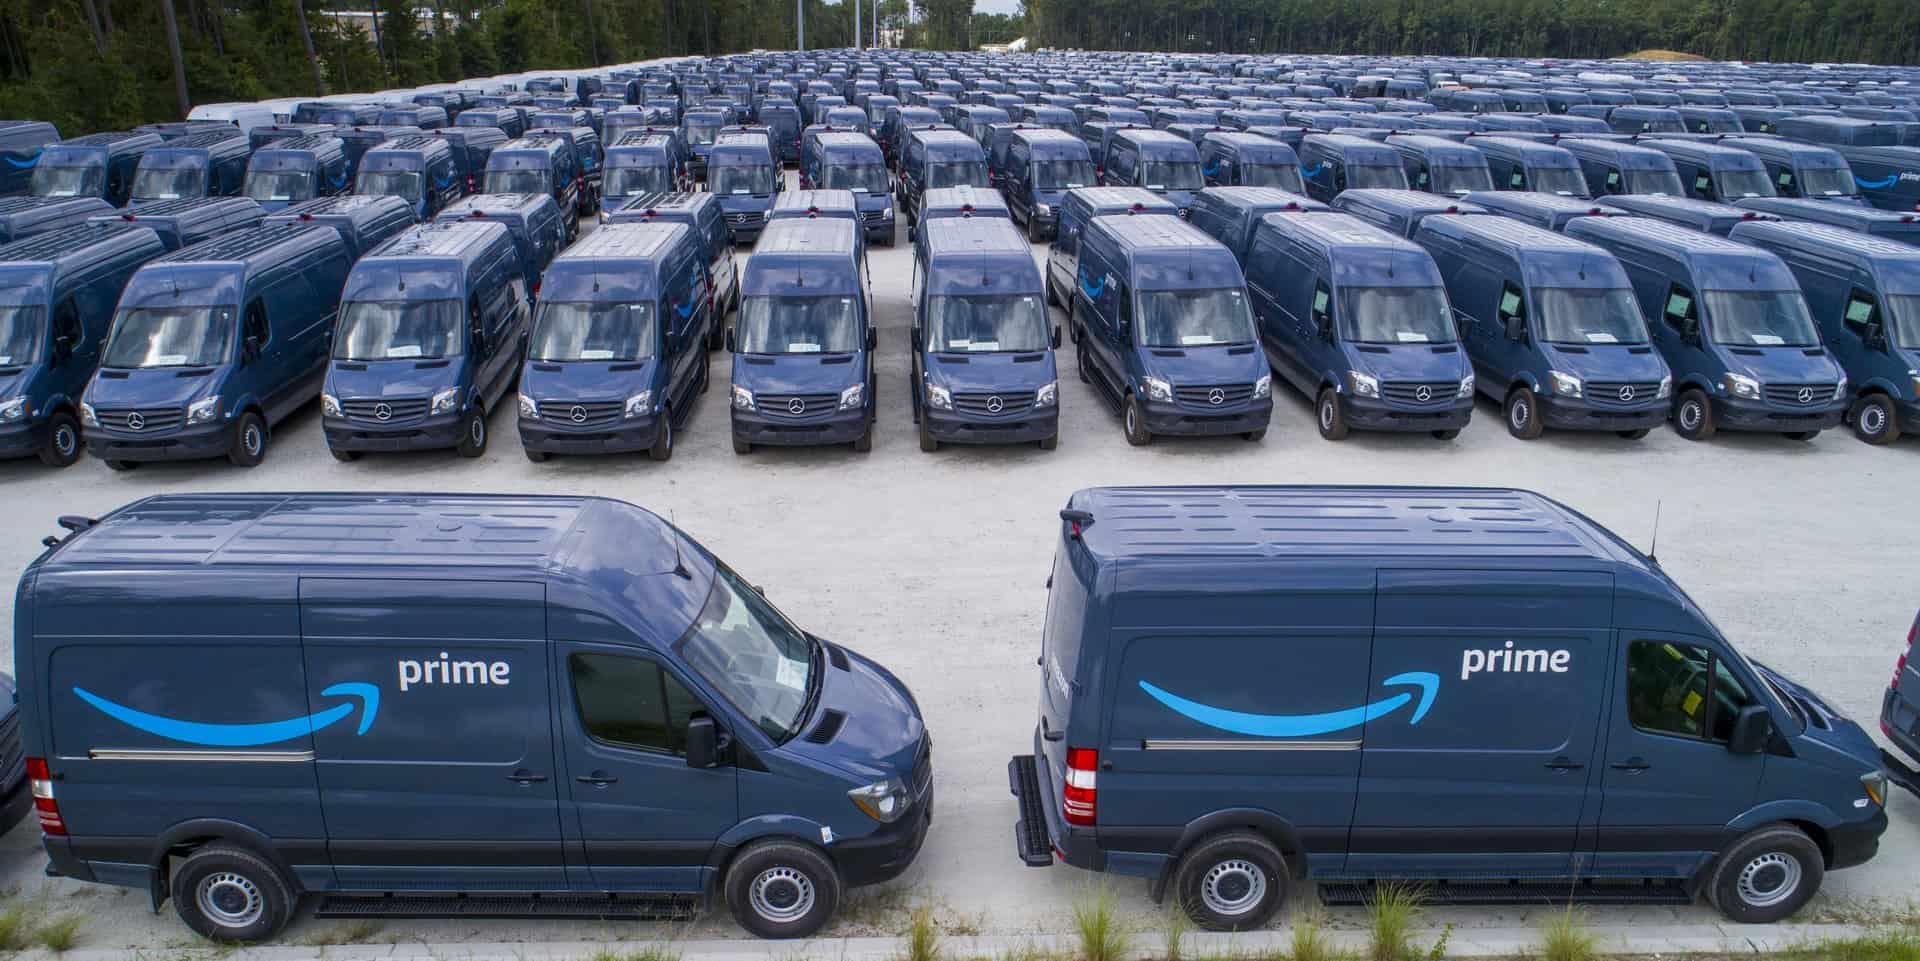 Wortel geef de bloem water Fobie 20,000 leased Sprinter vans and O/Os: Amazon's last-mile delivery strategy  comes into focus - FreightWaves